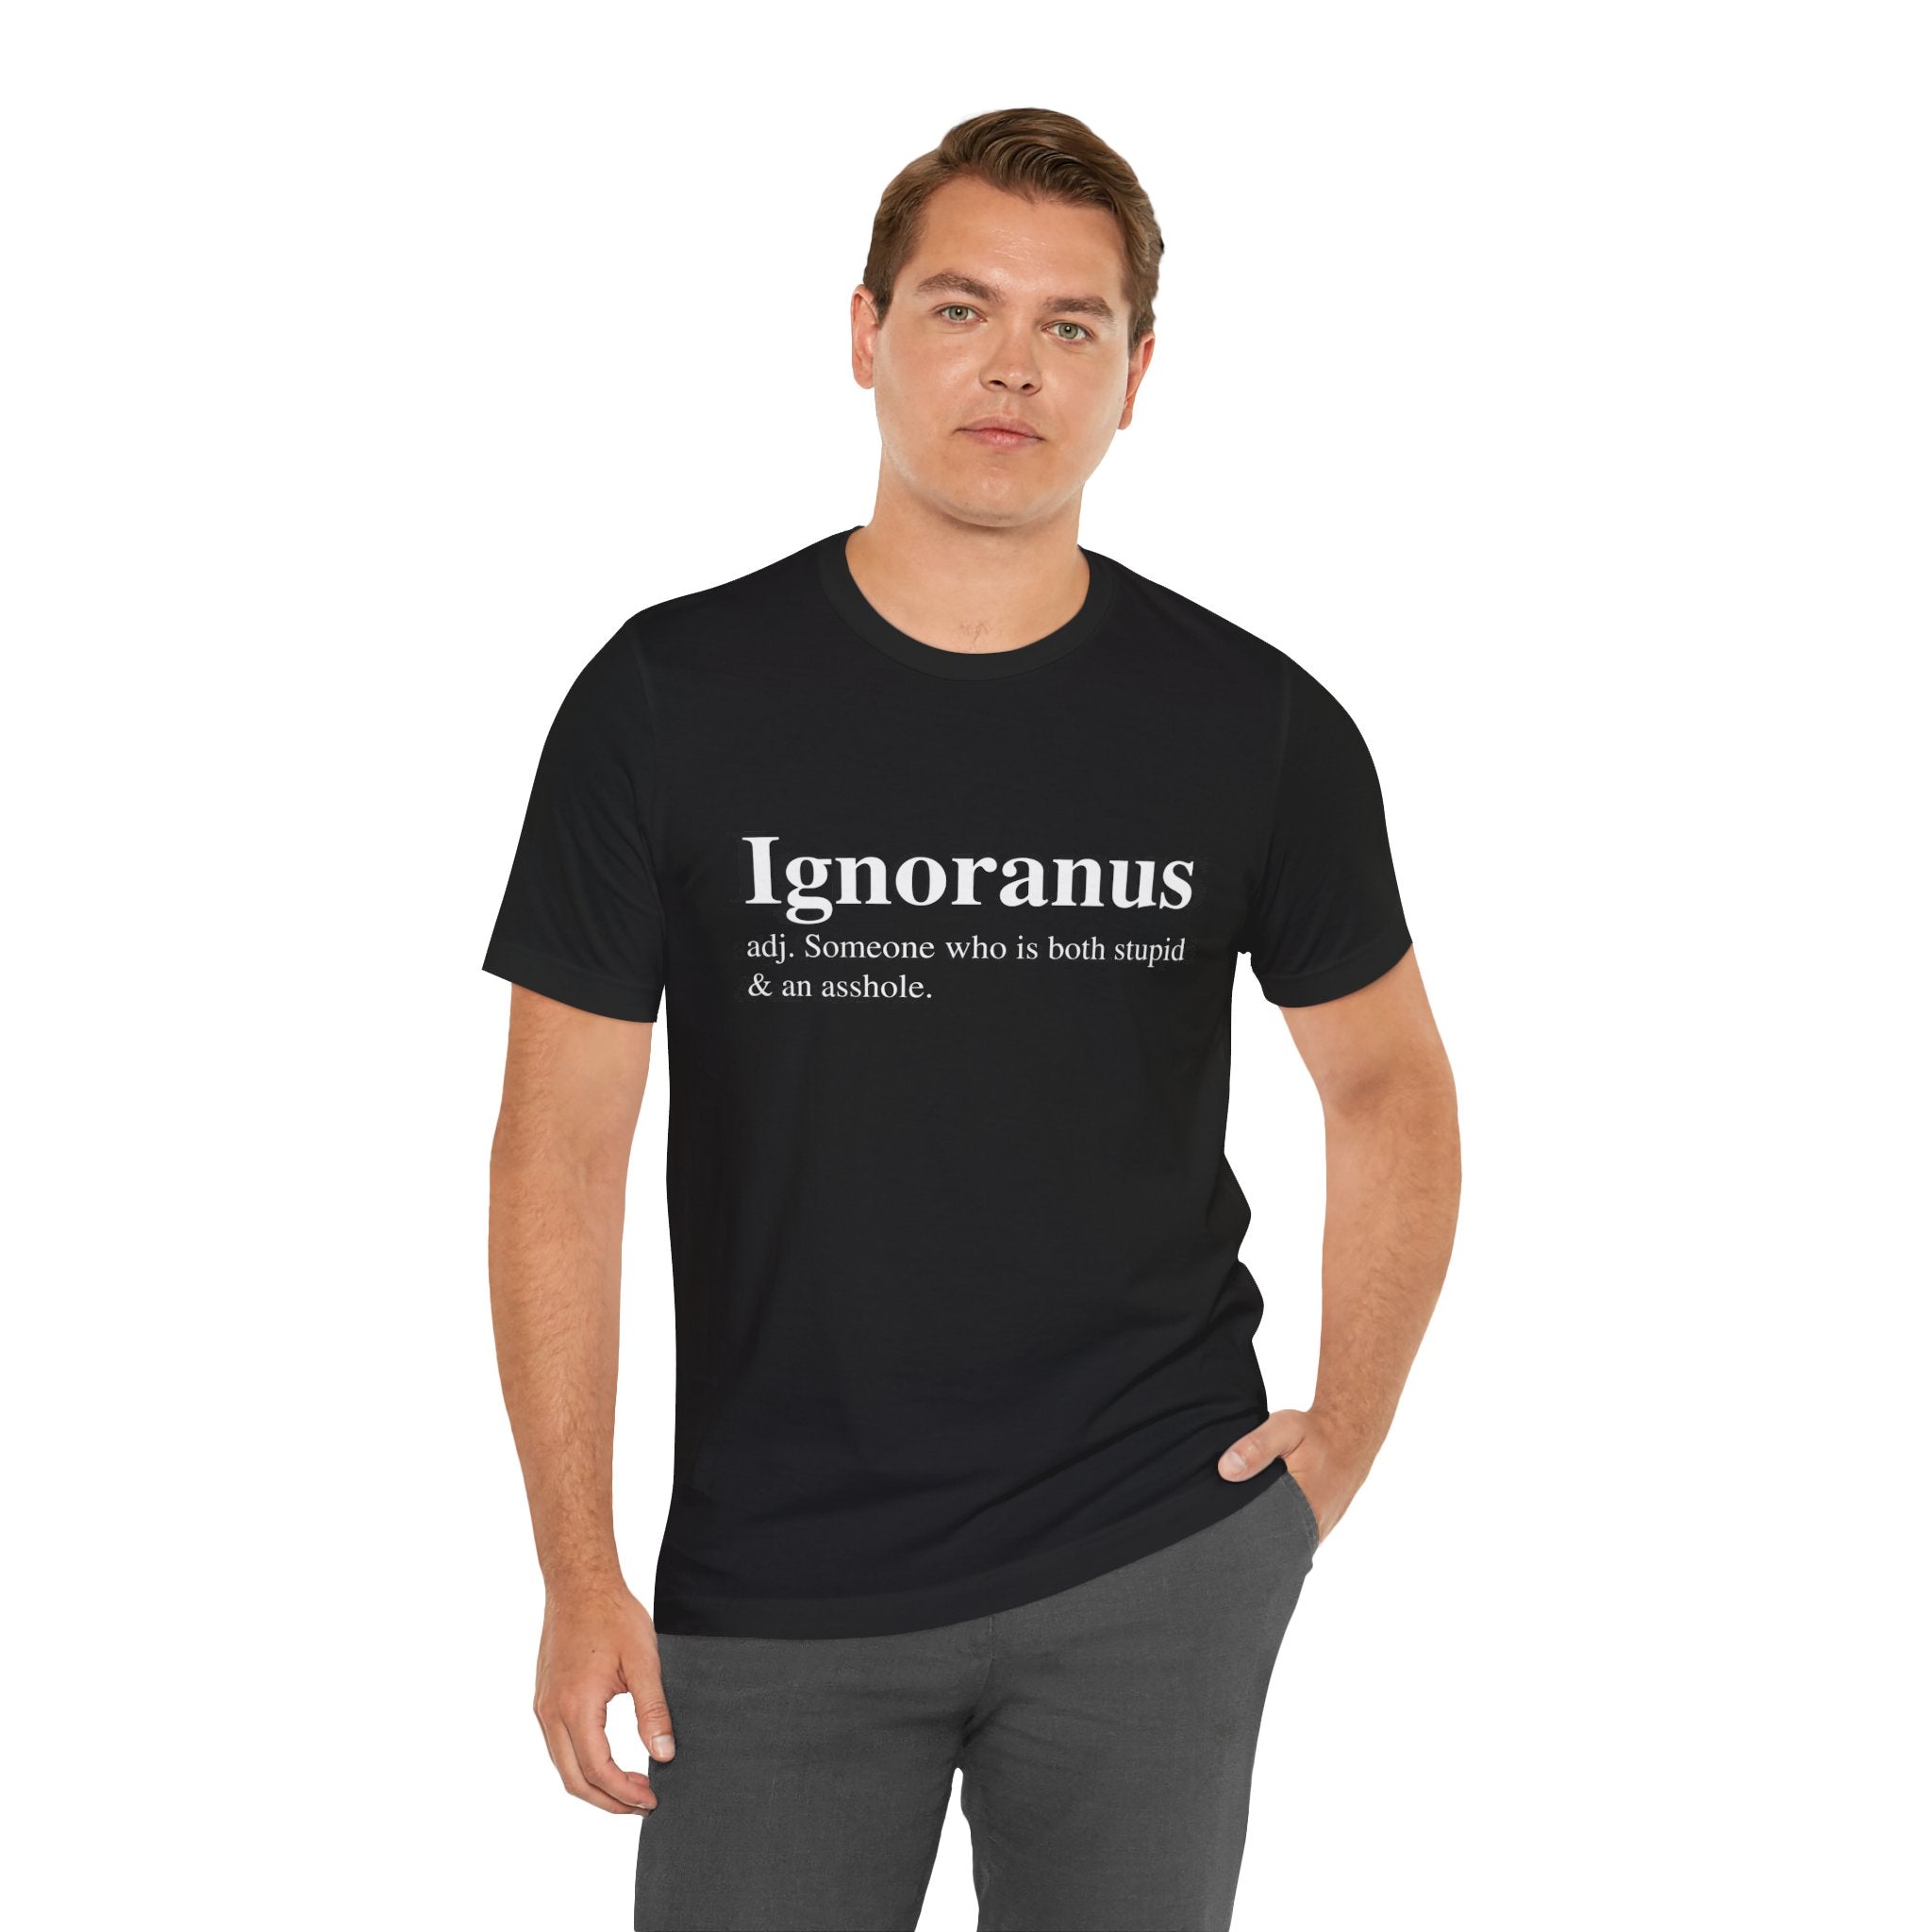 Man in a soft cotton, black Ignoranus T-Shirt with the text "ignoranus: someone who is both stupid and an asshole" printed on it, standing against a white background.